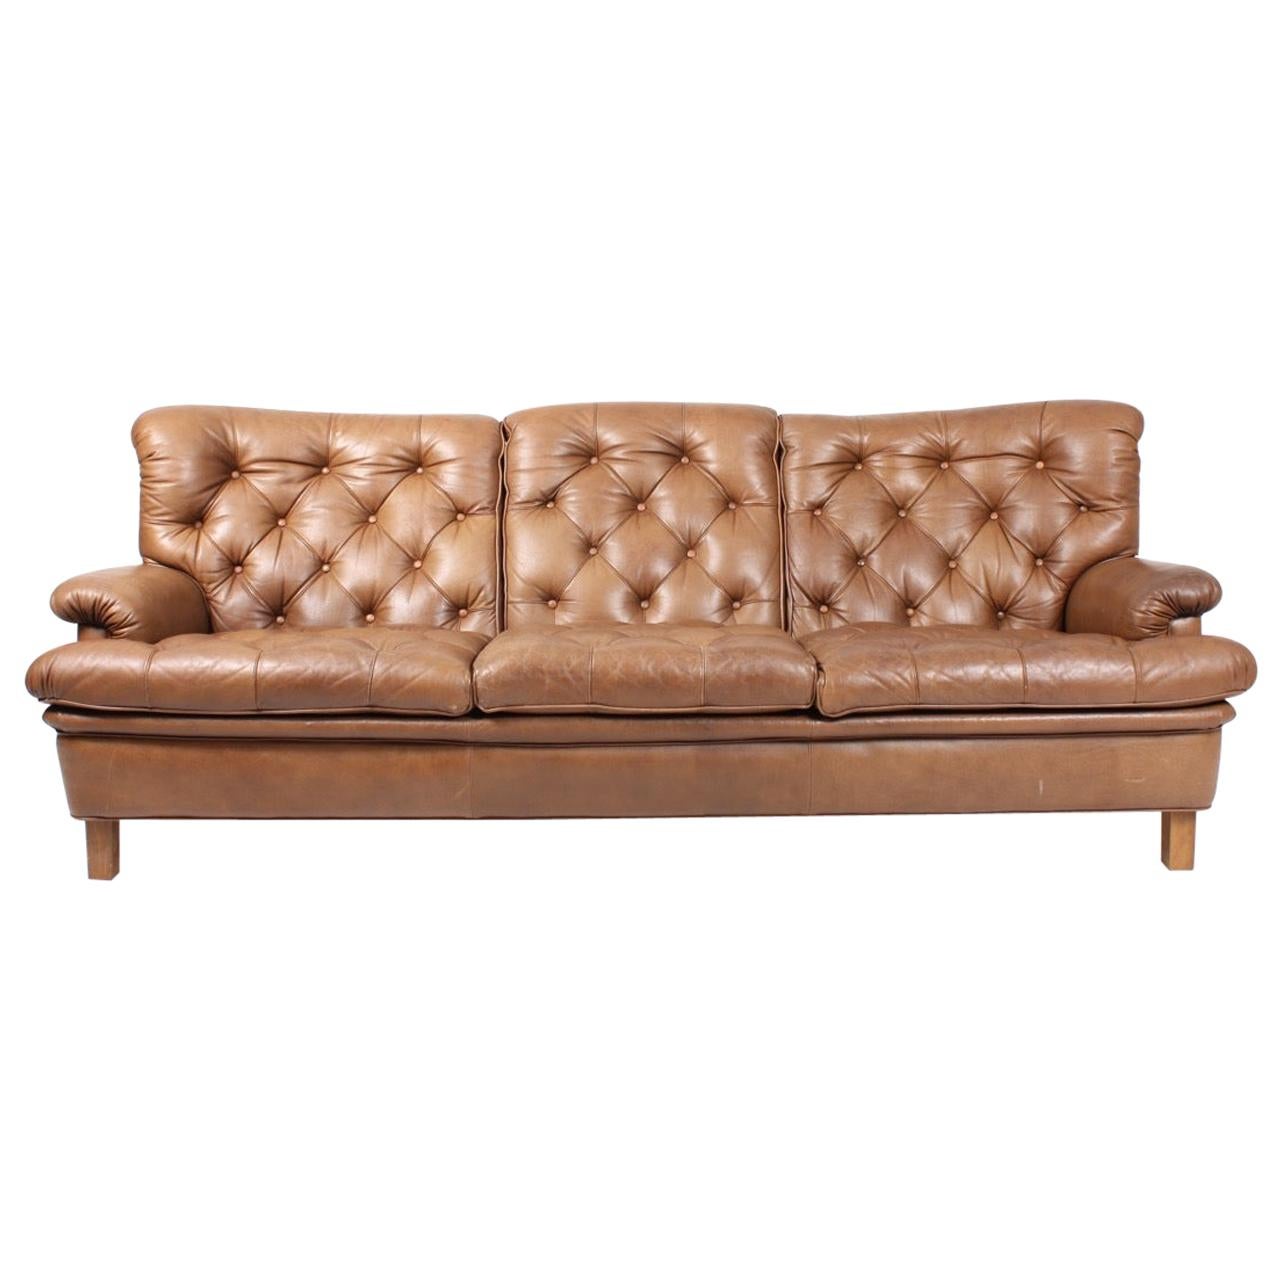 Midcentury Sofa in Patinated Leather by Arne Norell, Made in Sweden, 1960s